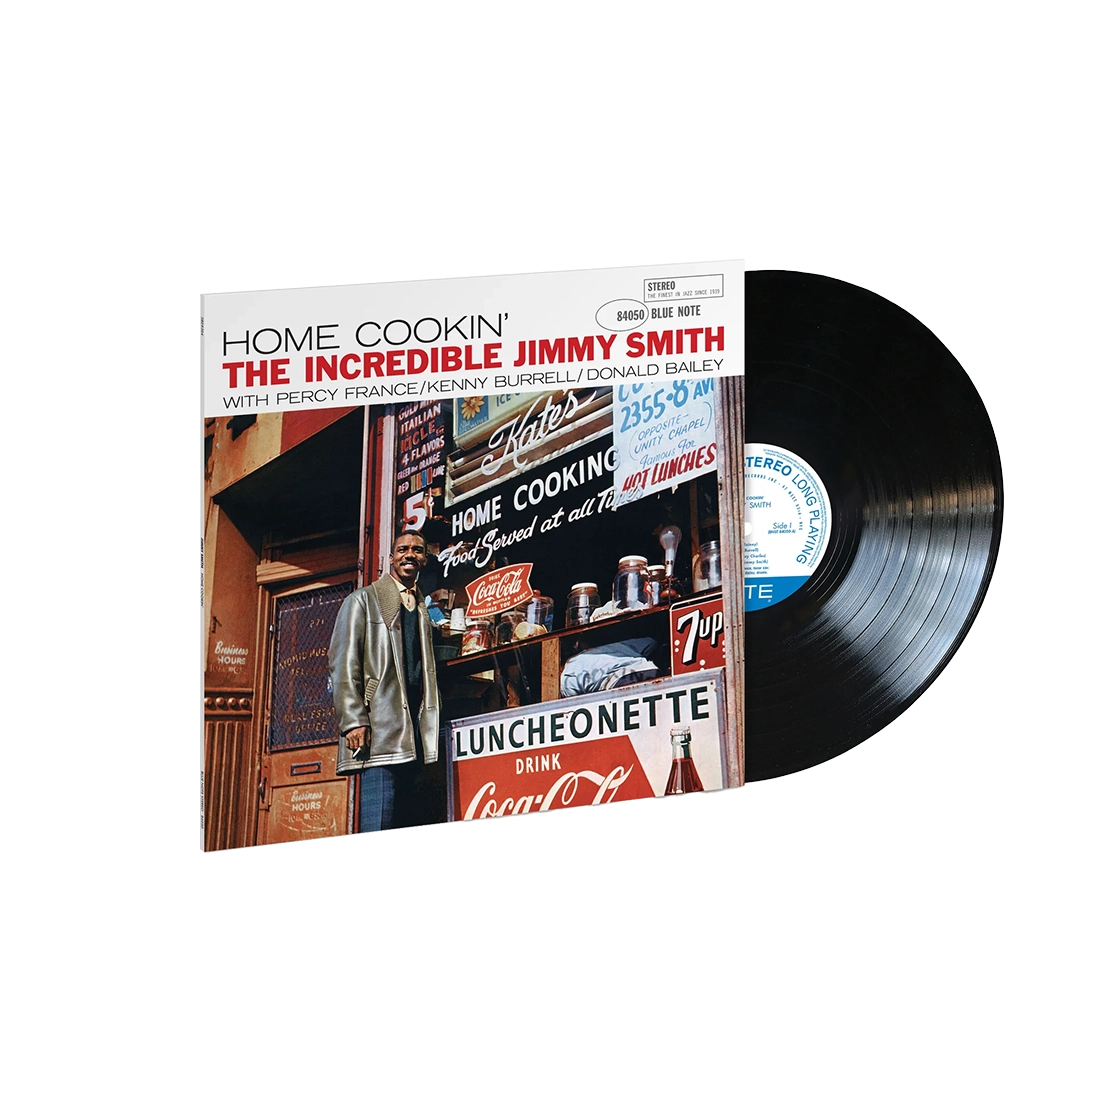 Jimmy Smith, Jimmy Smith, Percy France, Kenny Burrell, Donald Bailey - Home Cookin'  (Classic Vinyl Series): Vinyl LP